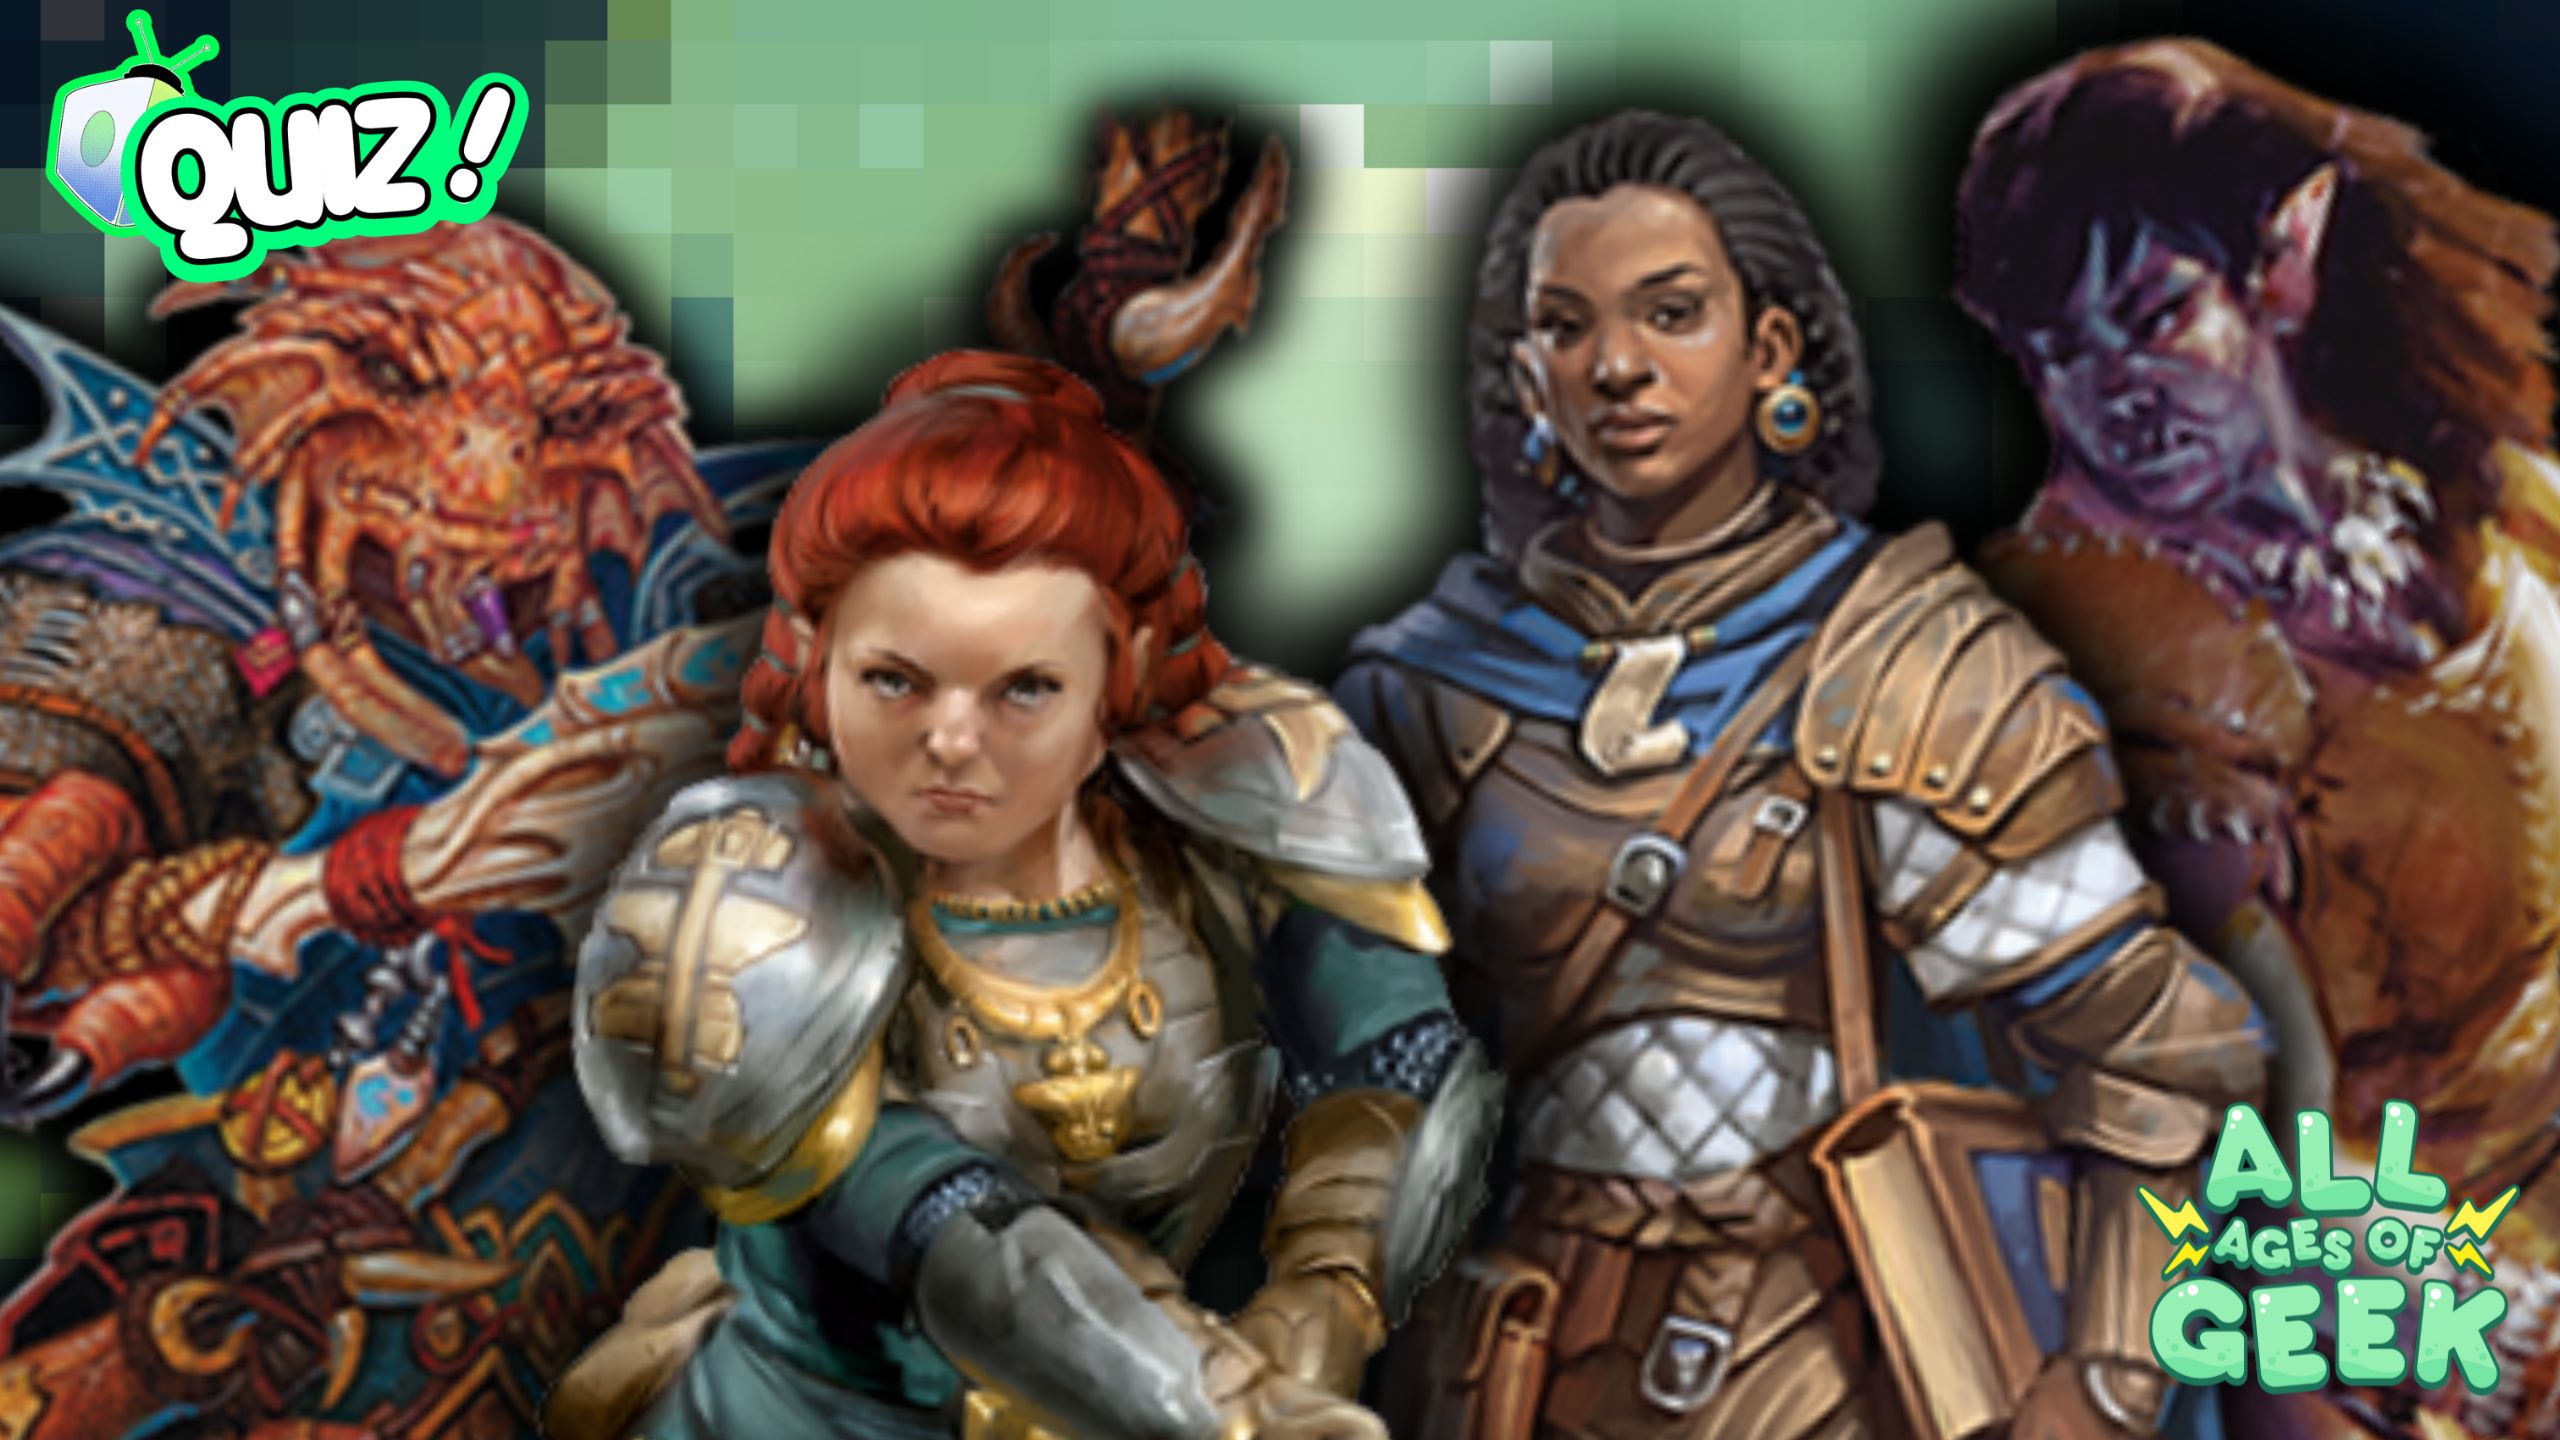 An image showing a variety of Dungeons and Dragons characters from different races, including a Dragonborn, Dwarf, Human, and Half-Orc, with the All Ages of Geek logo and 'Quiz' text, used for the 'Which DnD Race Are You?' quiz.